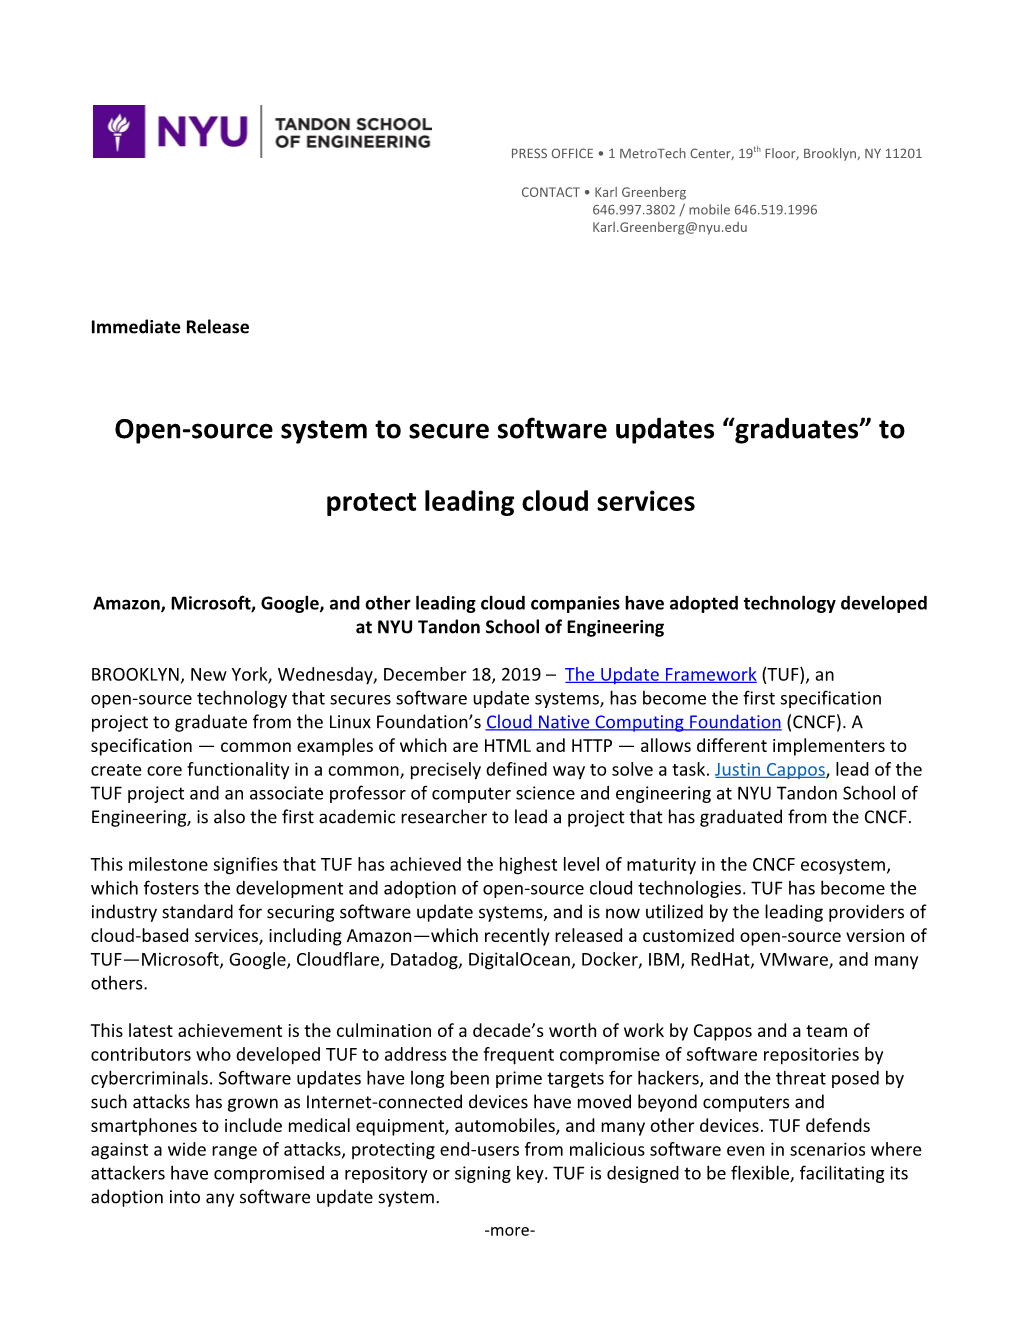 Open-Source System to Secure Software Updates “Graduates” To